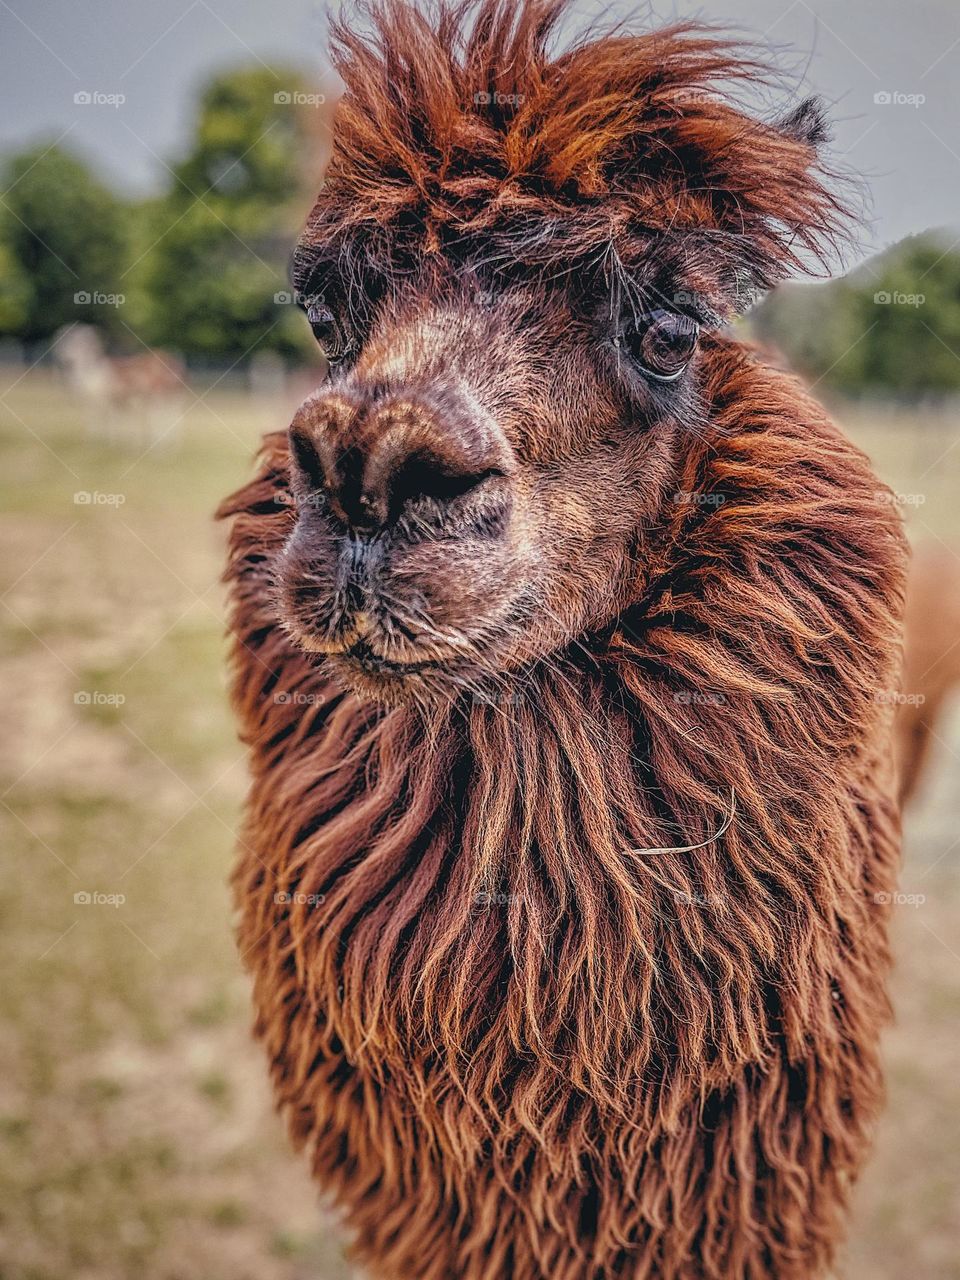 Brown furry alpaca up close and personal, brown alpaca looks at you, portrait of an alpaca, farm animals in Pennsylvania, autumn colors in animals 